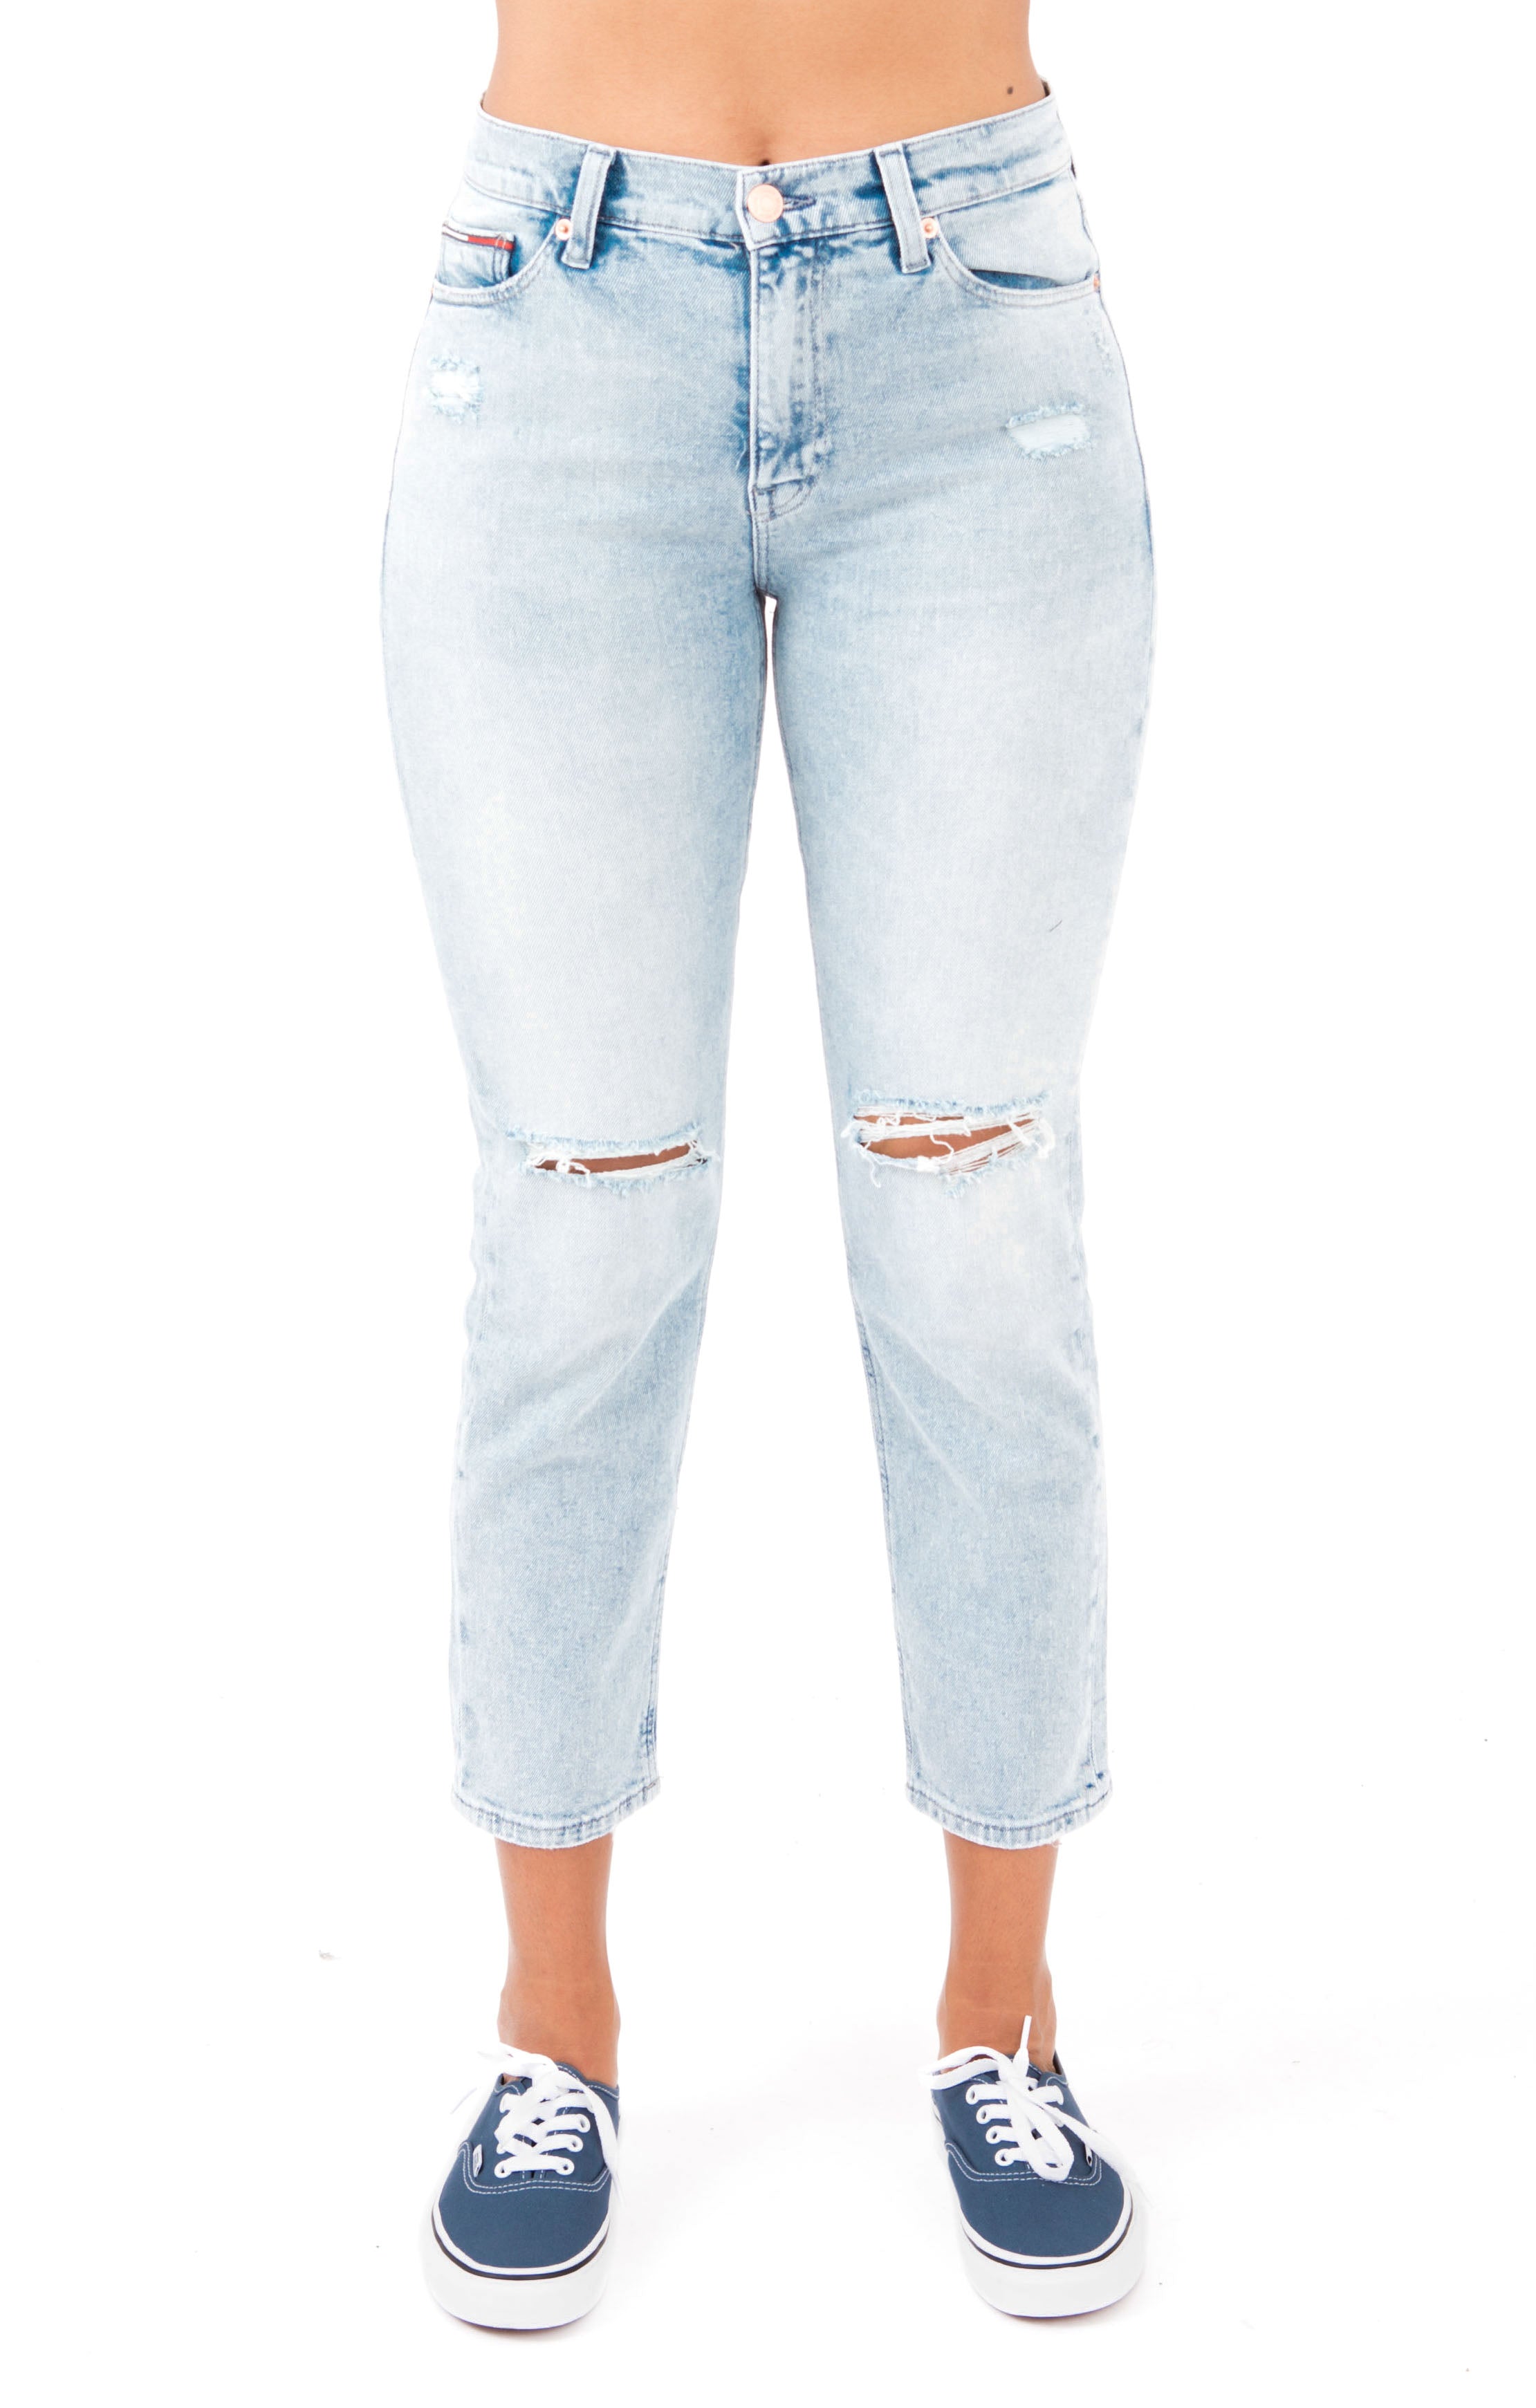 (DW04747) 1991 High Rise Straight Fit Jean - Flanders Light Blue